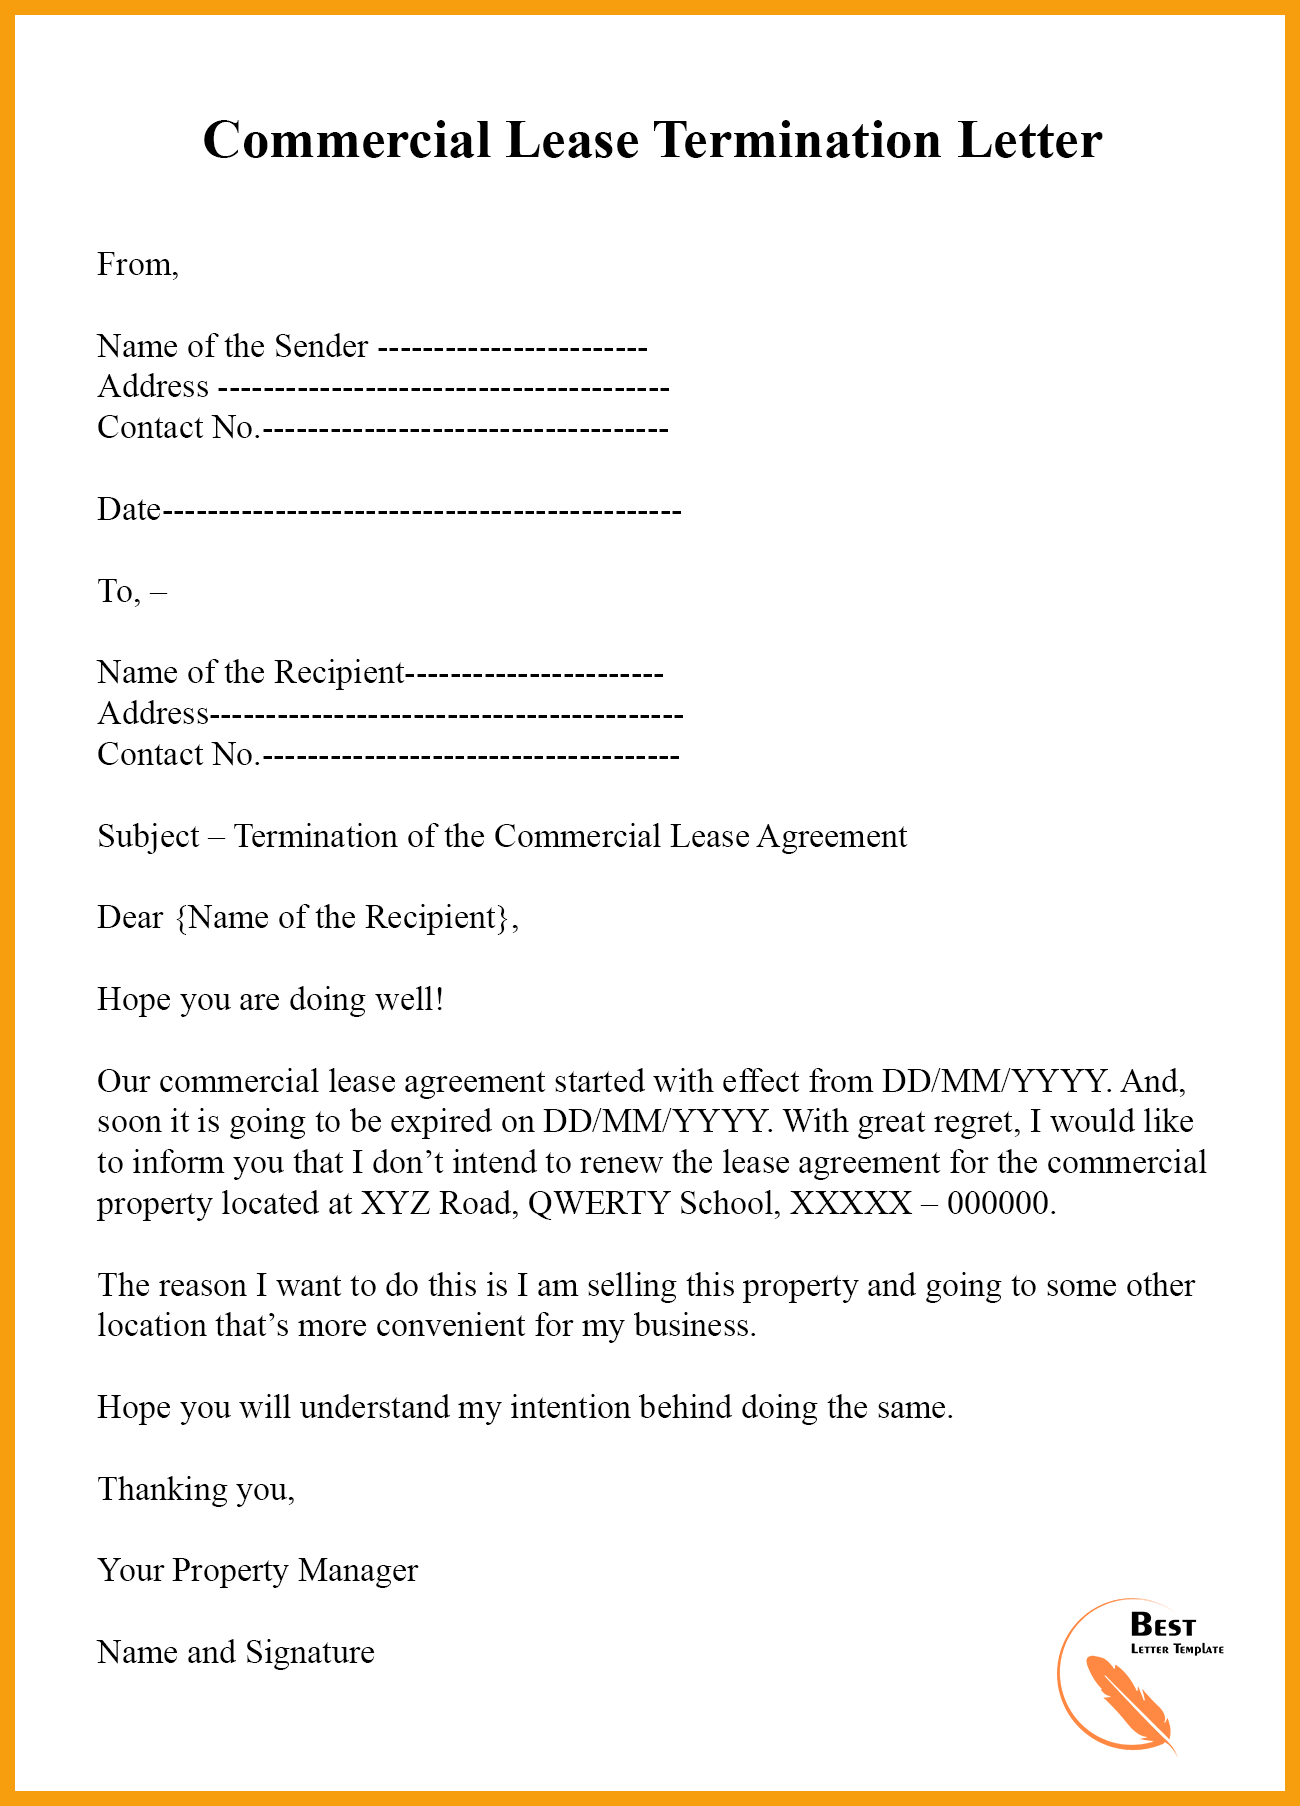 Lease Termination Letter Template – Format, Sample & Example